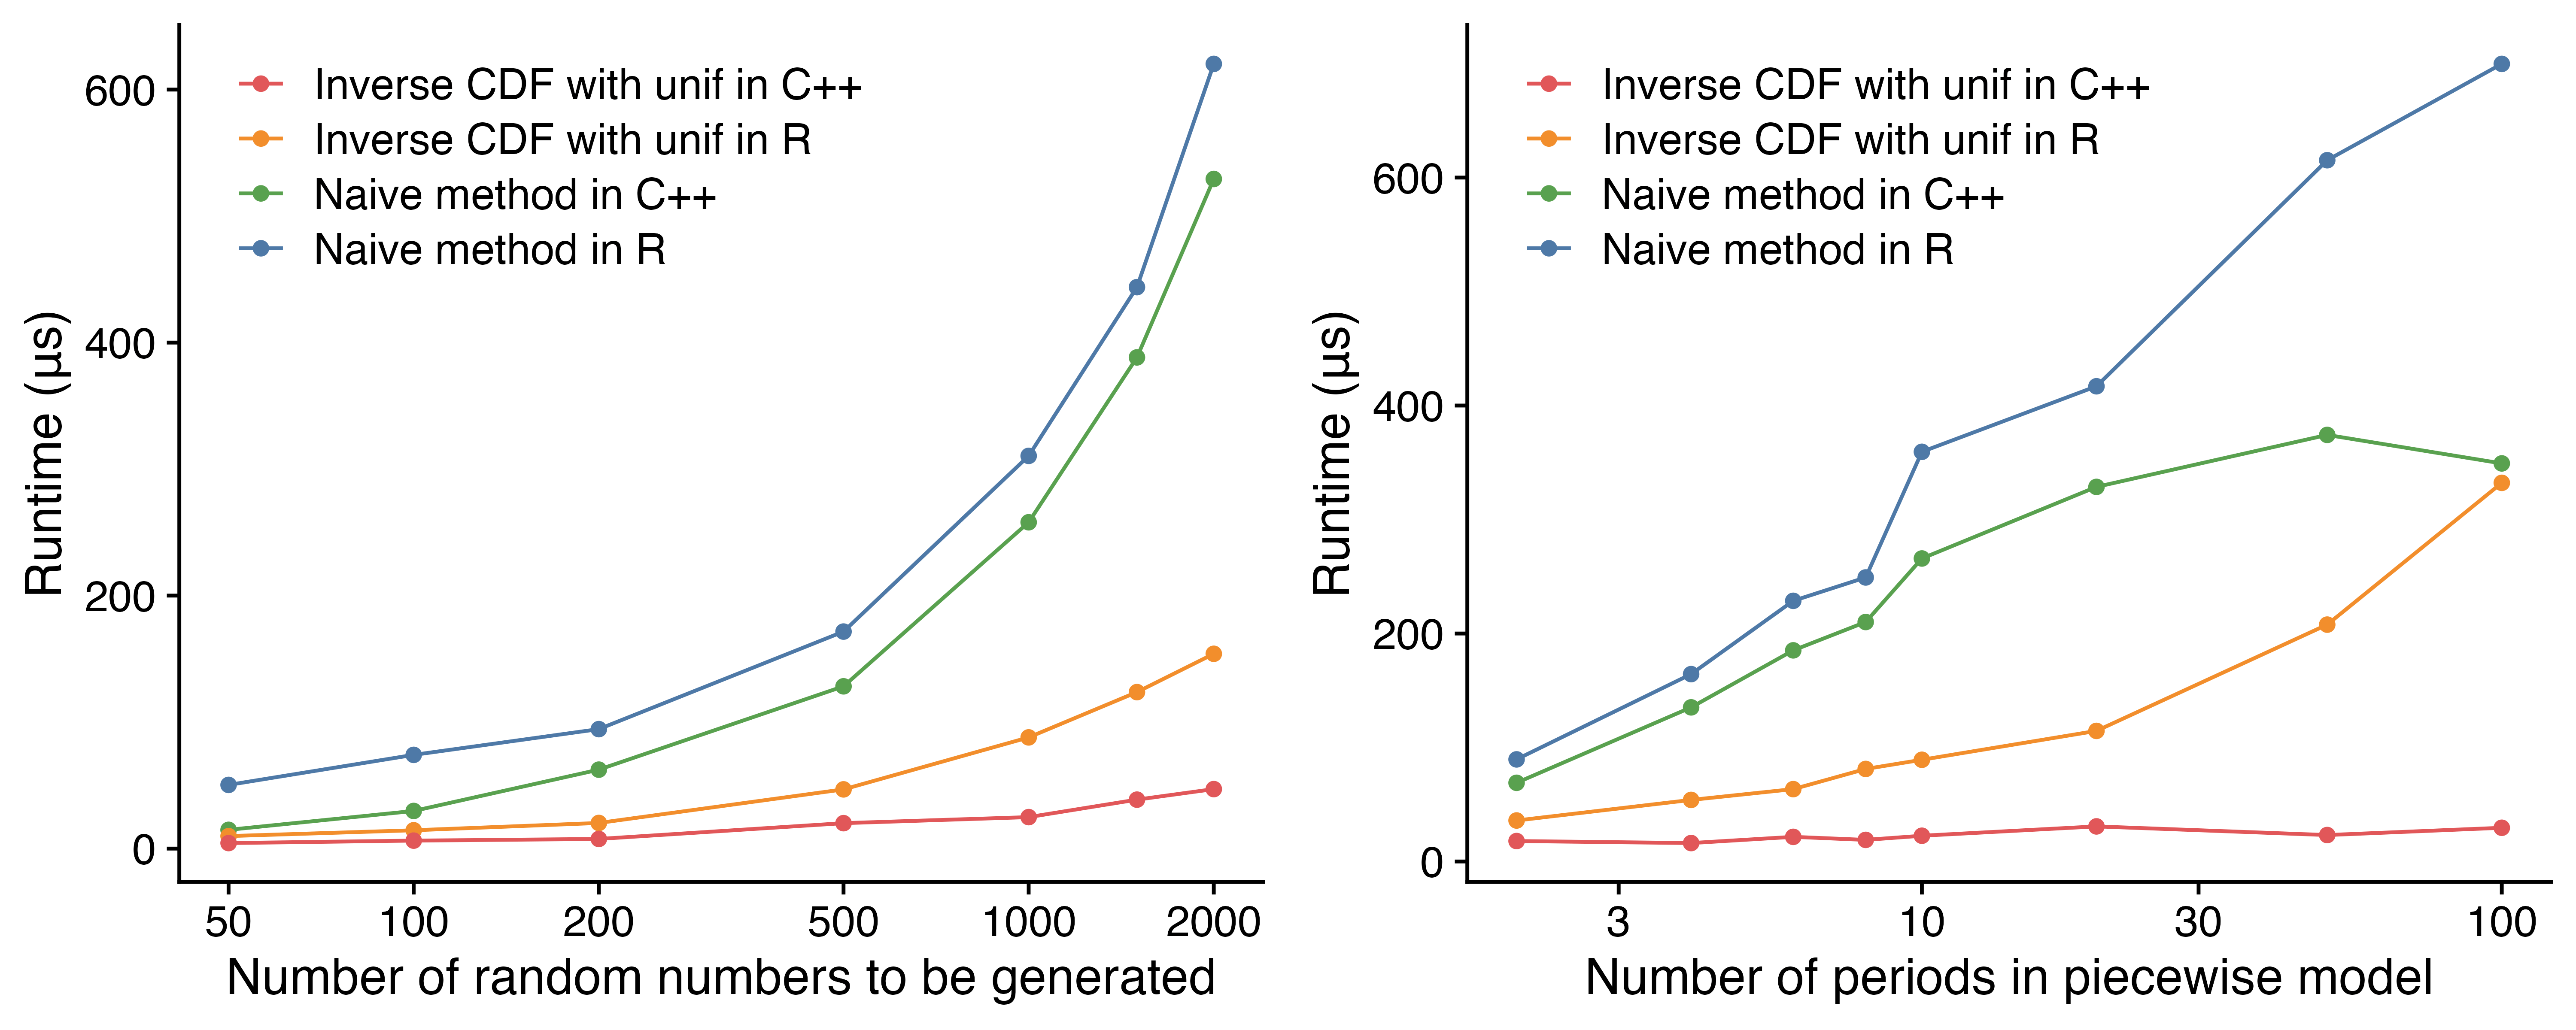 Scaling of different `rpwexp()` implementations. The C++ implementation of the inverse CDF method scales the best when number of observations or the number of time periods increases.